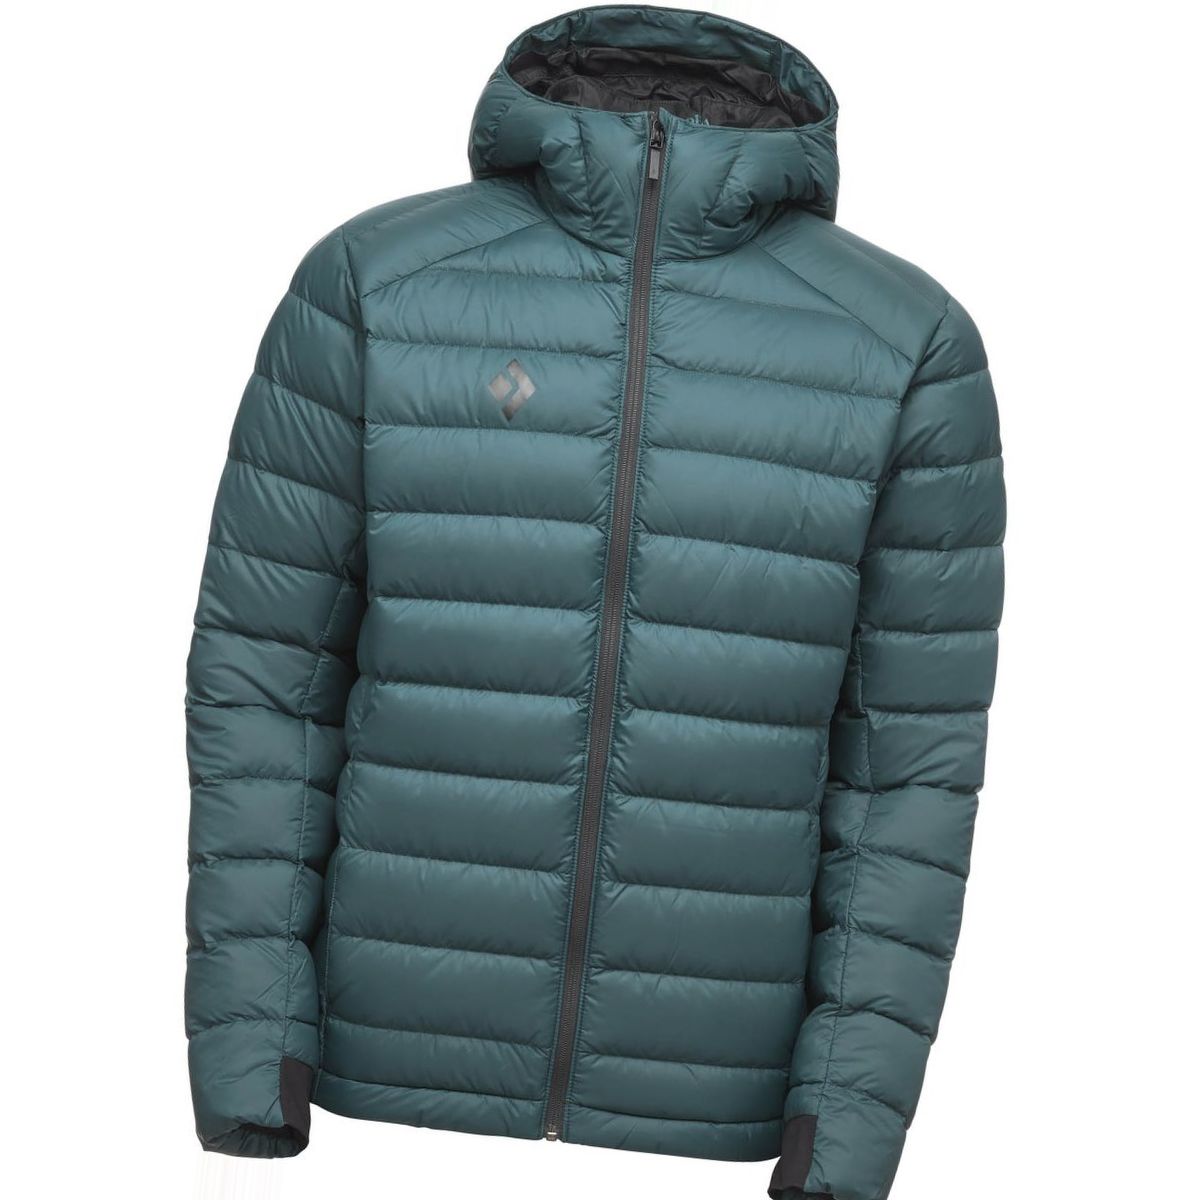 Black Diamond Cold Forge Hooded Down Jacket - Men's